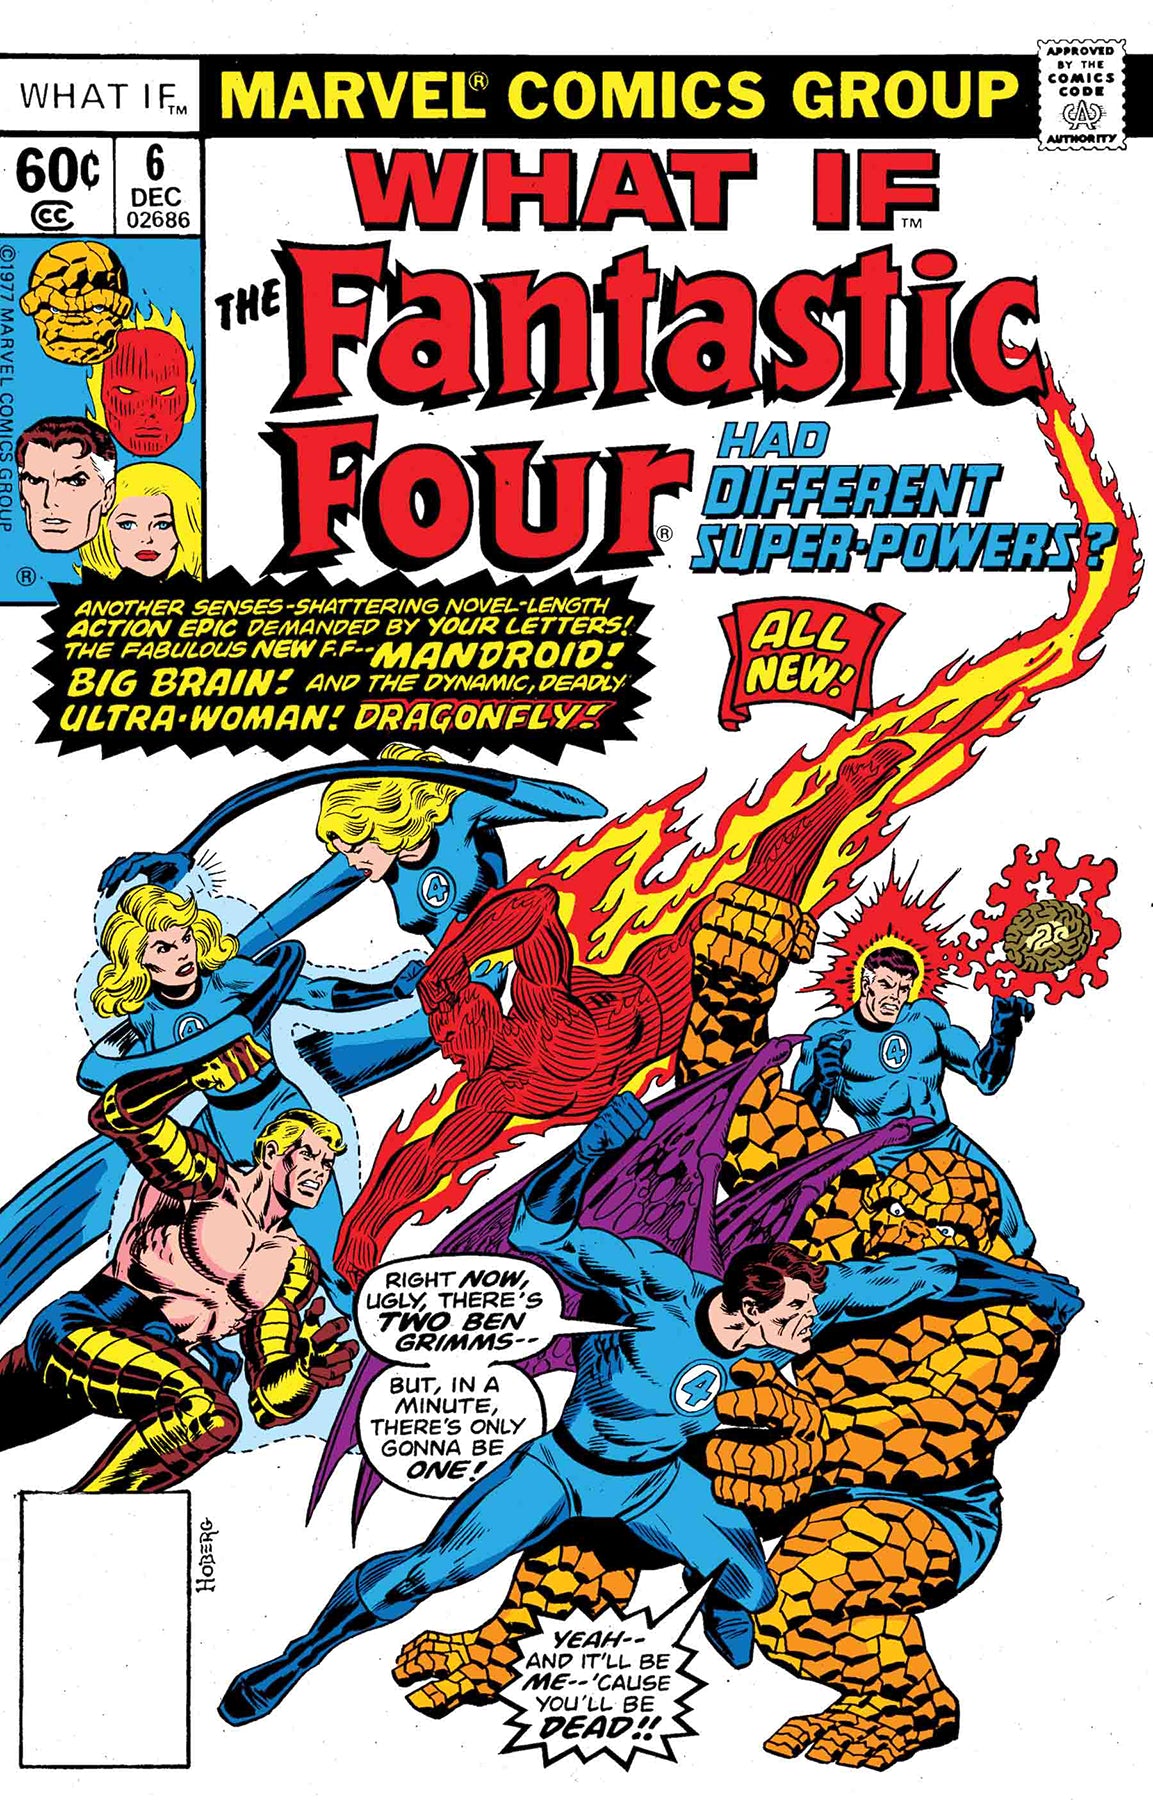 TRUE BELIEVERS WHAT IF THE FF HAD DIFFERENT SUPER-POWERS #1 COVER